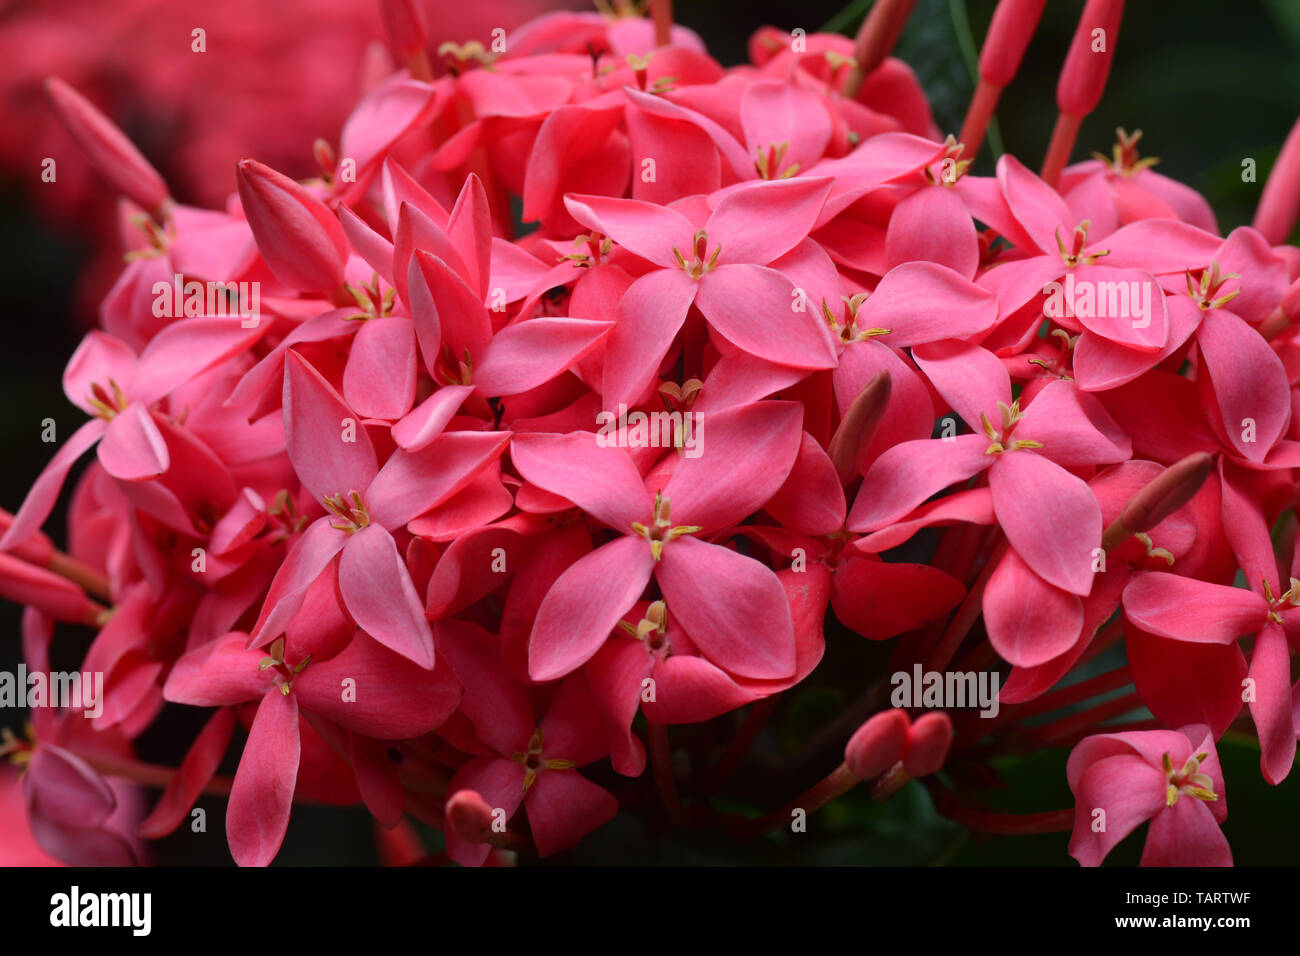 Ixora flower blossom in a garden. Red spike flower. King Ixora blooming (Ixora chinensis). Stock Photo